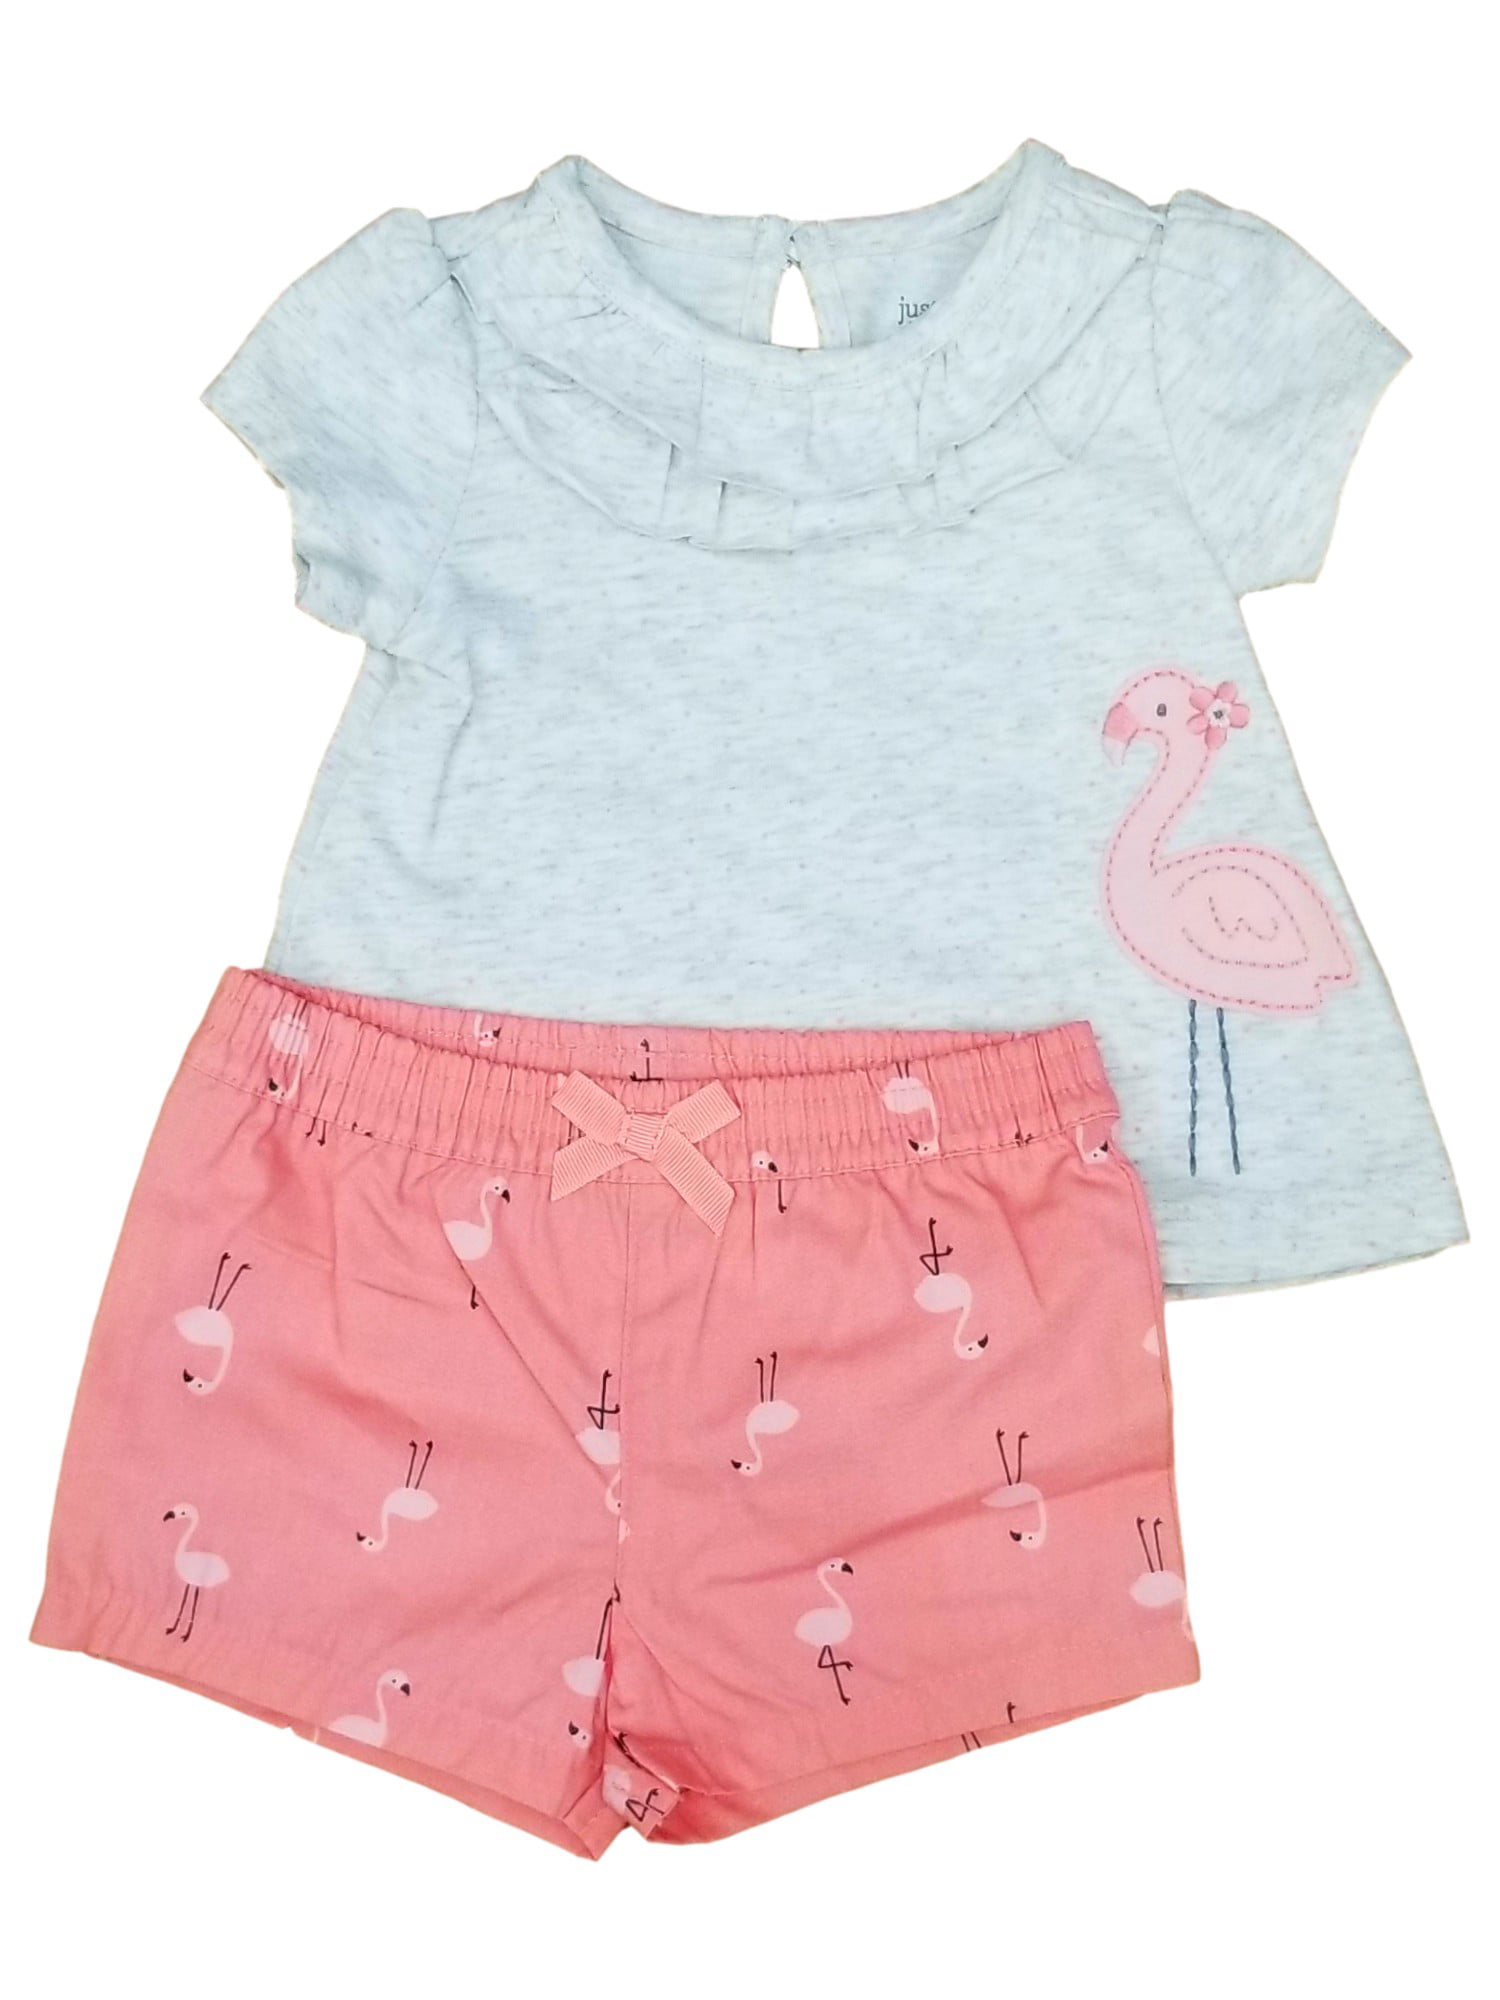 Carters Infant Girls 2pc Coral Pink Flamingo Baby Outfit Shirt & Shorts 3M  - Walmart.com